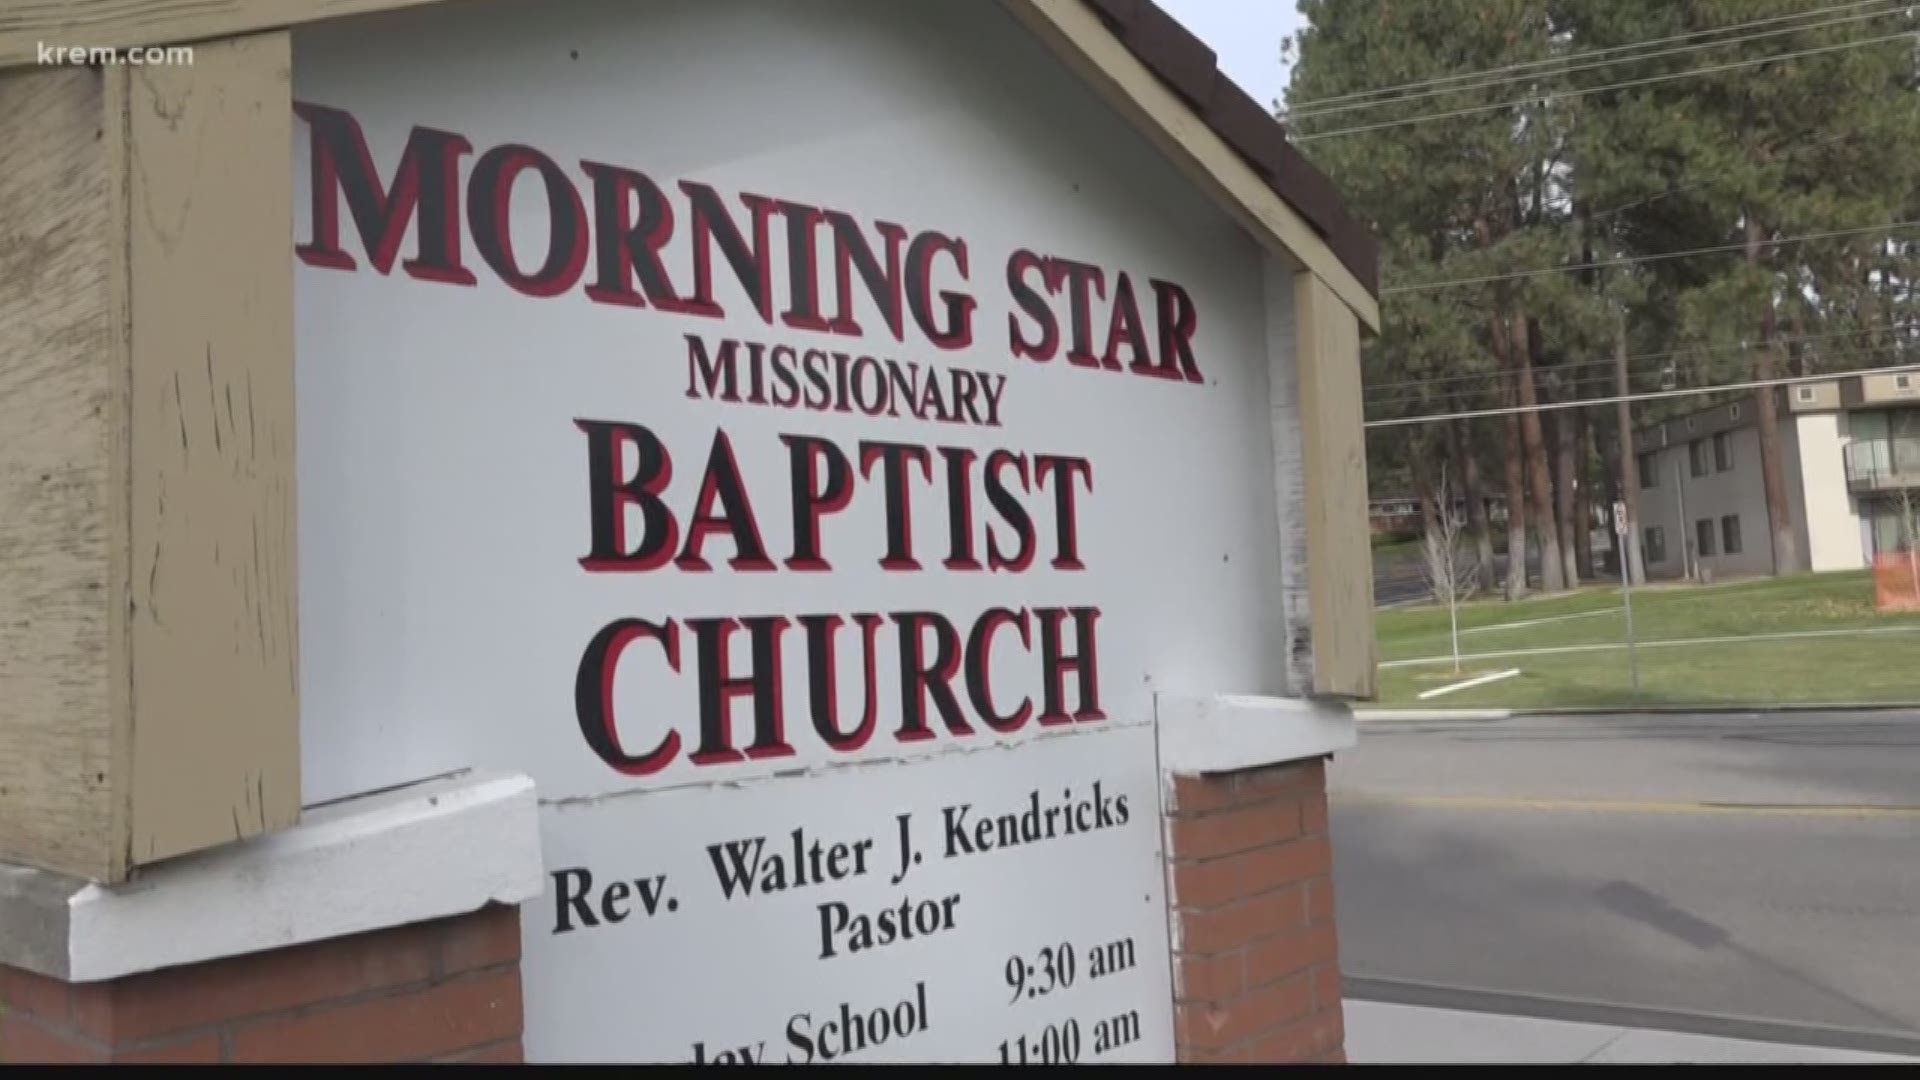 Walter Kendricks, pastor of Morning Star Baptist Church, said some of his neighbors called him Monday afternoon about “violent fliers” posted on the church’s sign.